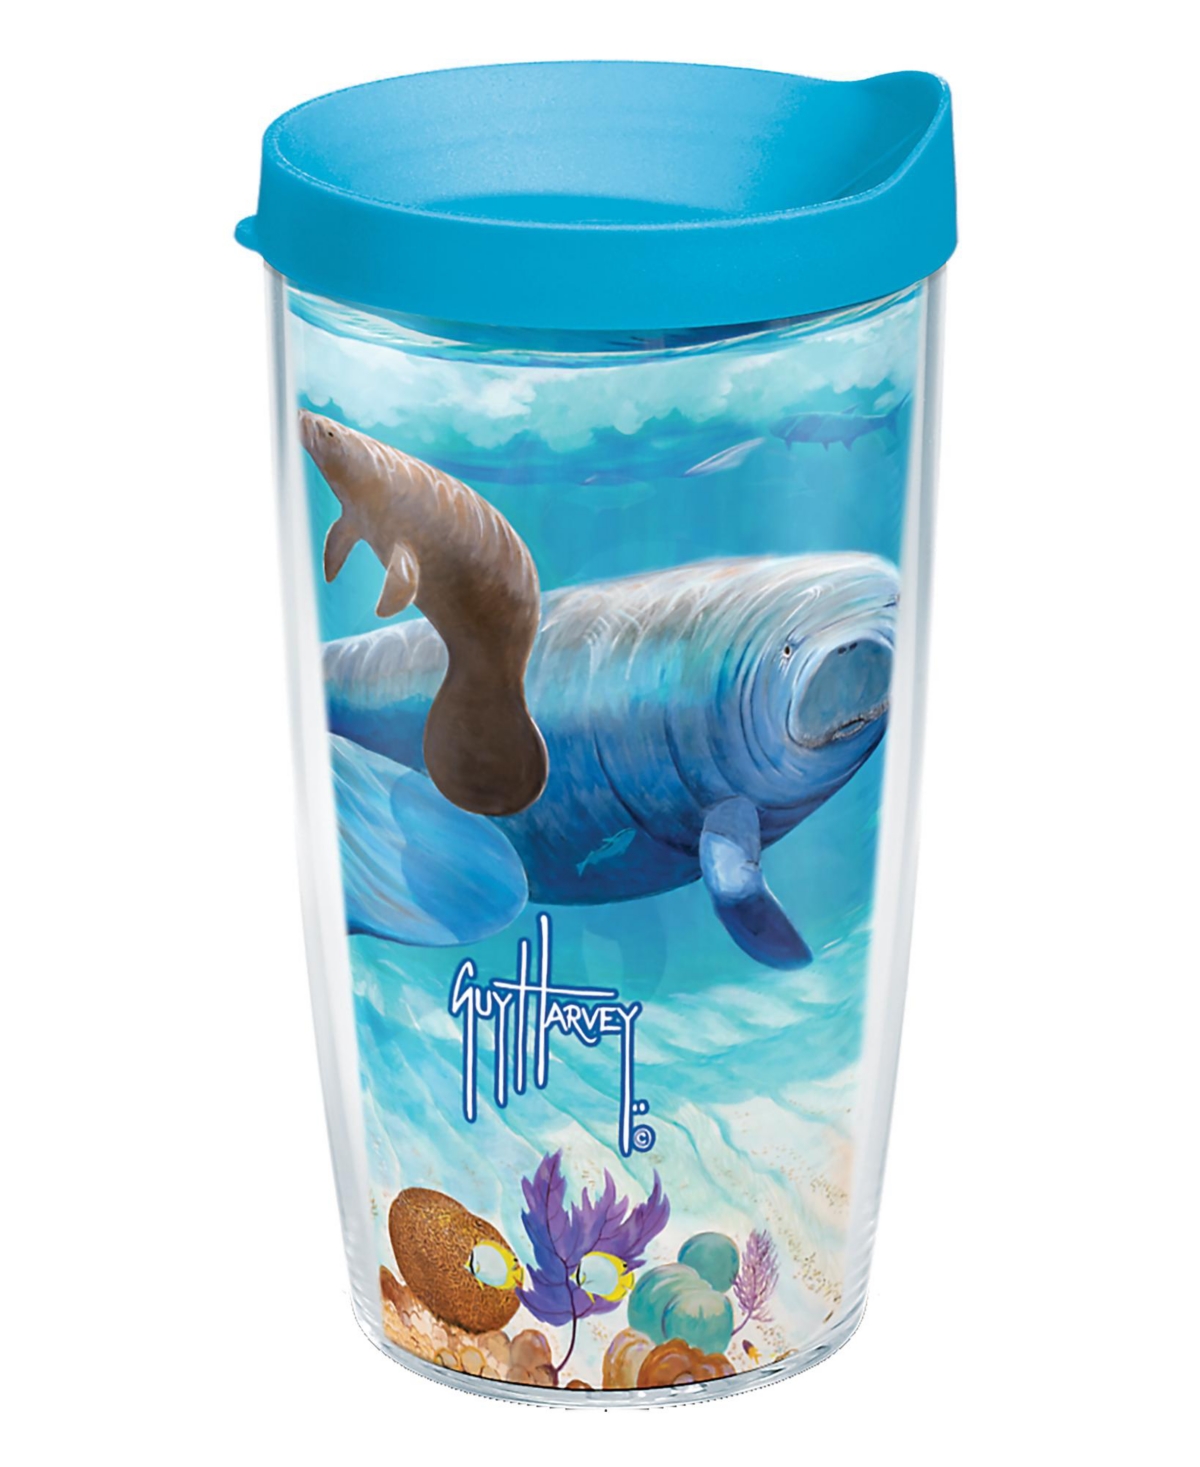 Tervis Tumbler Tervis Guy Harvey Manatee Made In Usa Double Walled Insulated Tumbler Travel Cup Keeps Drinks Cold & In Open Miscellaneous